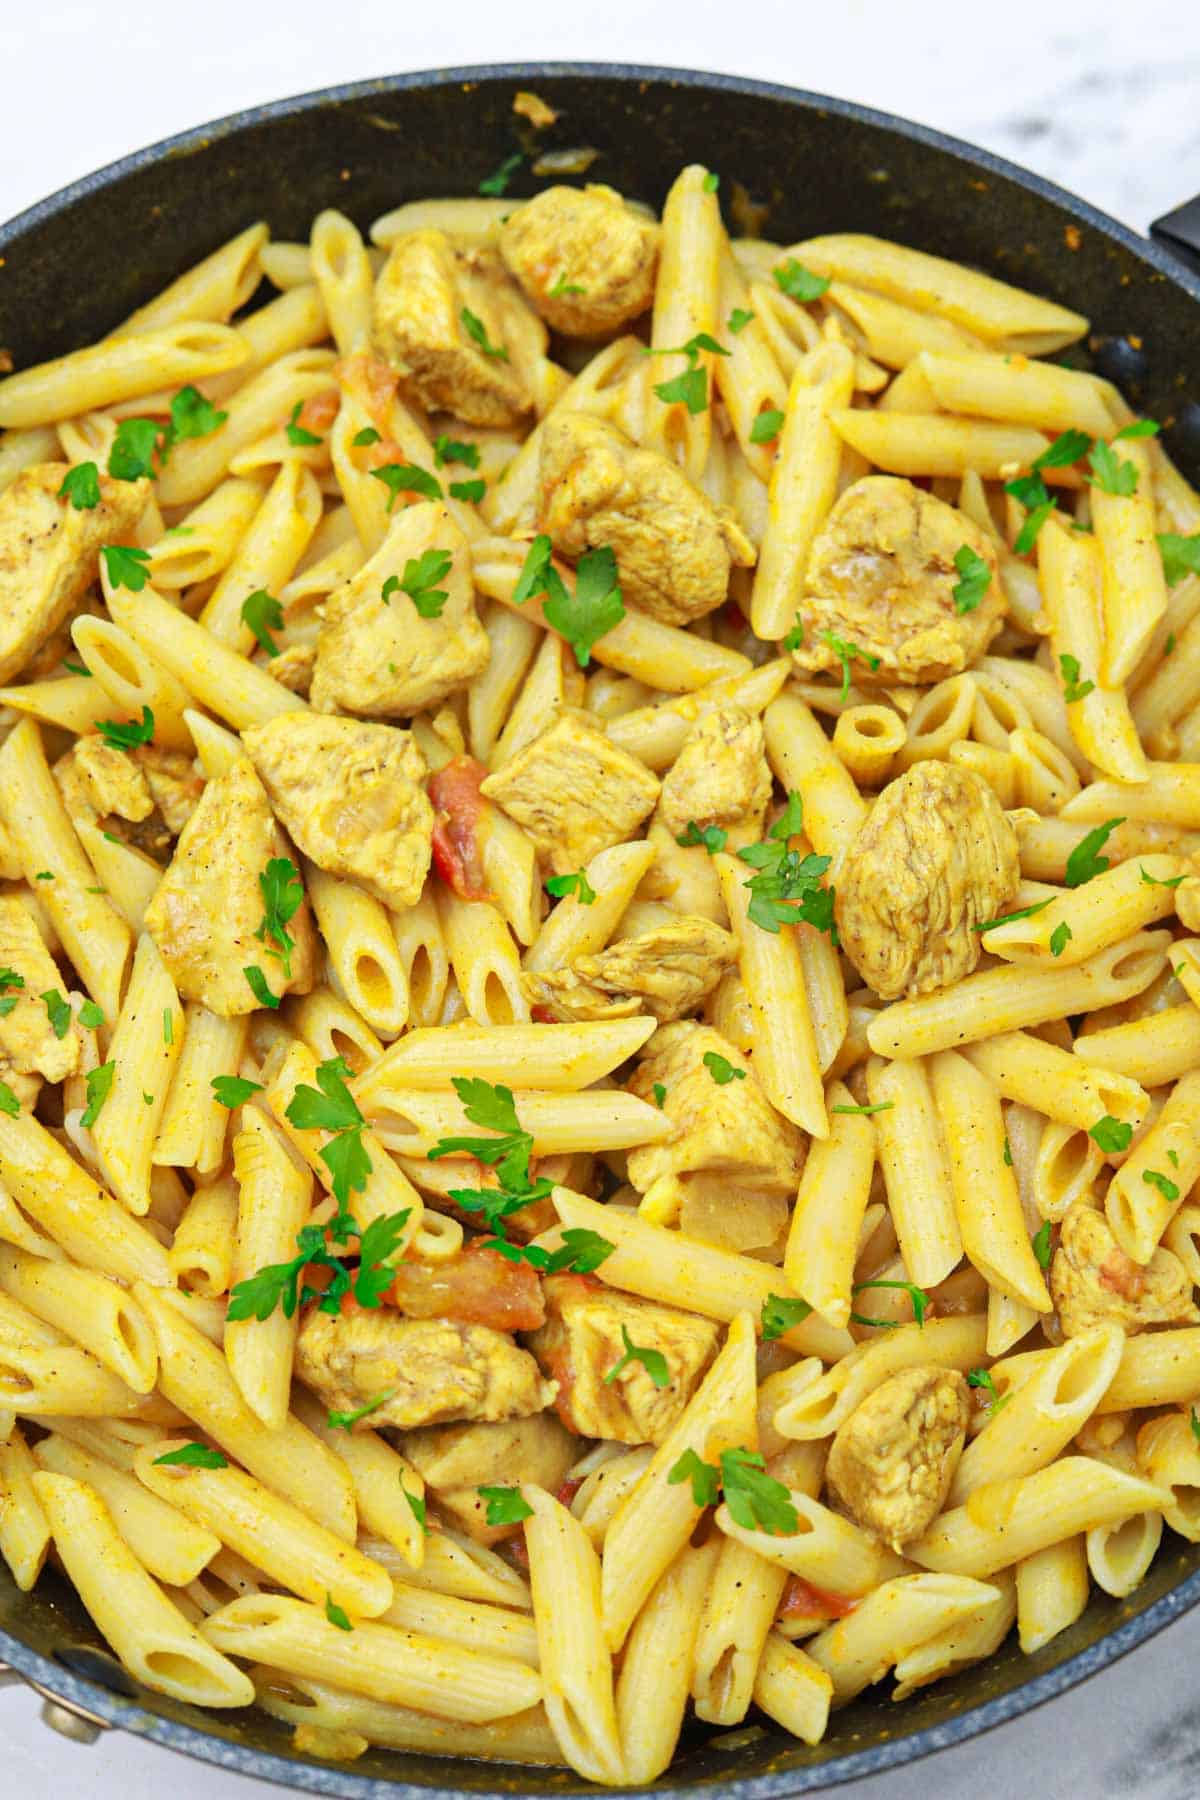 coconut chicken curry pasta in a pan garnished with coriander.